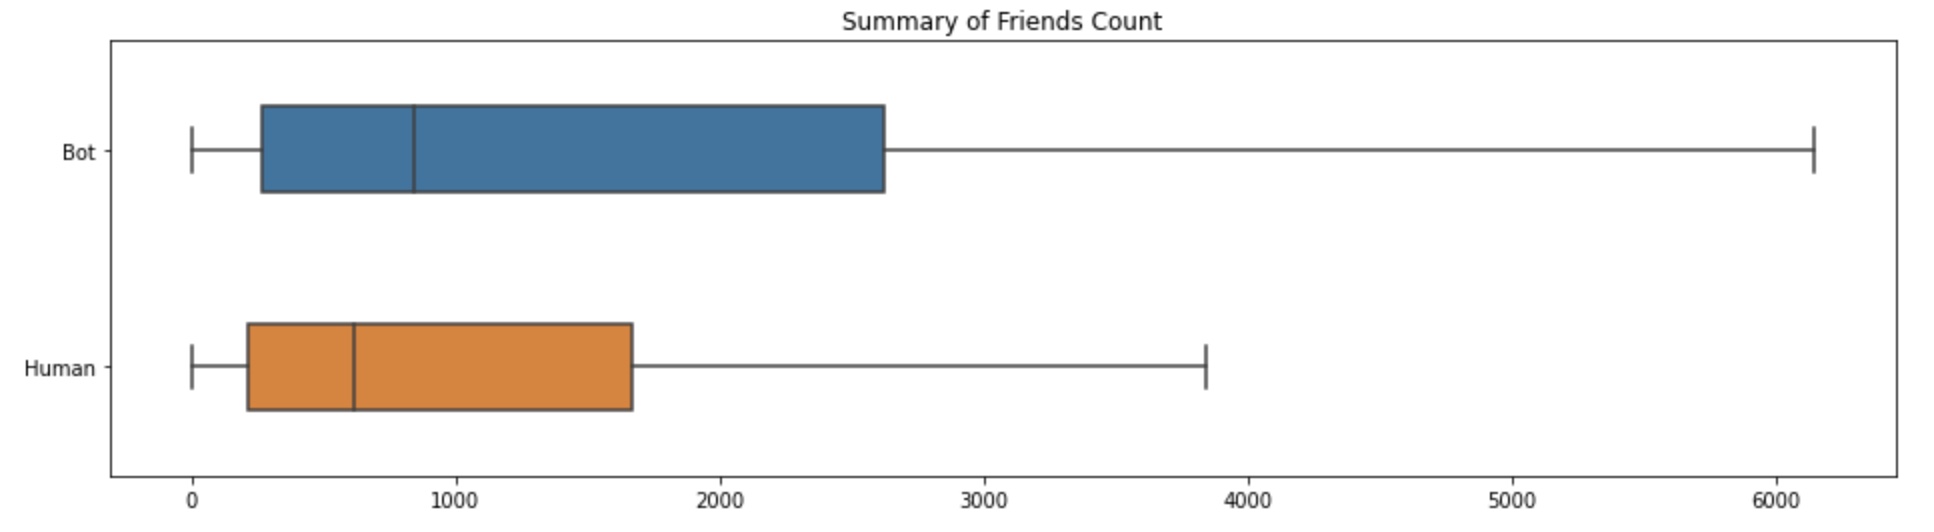 Summary of Friends Count